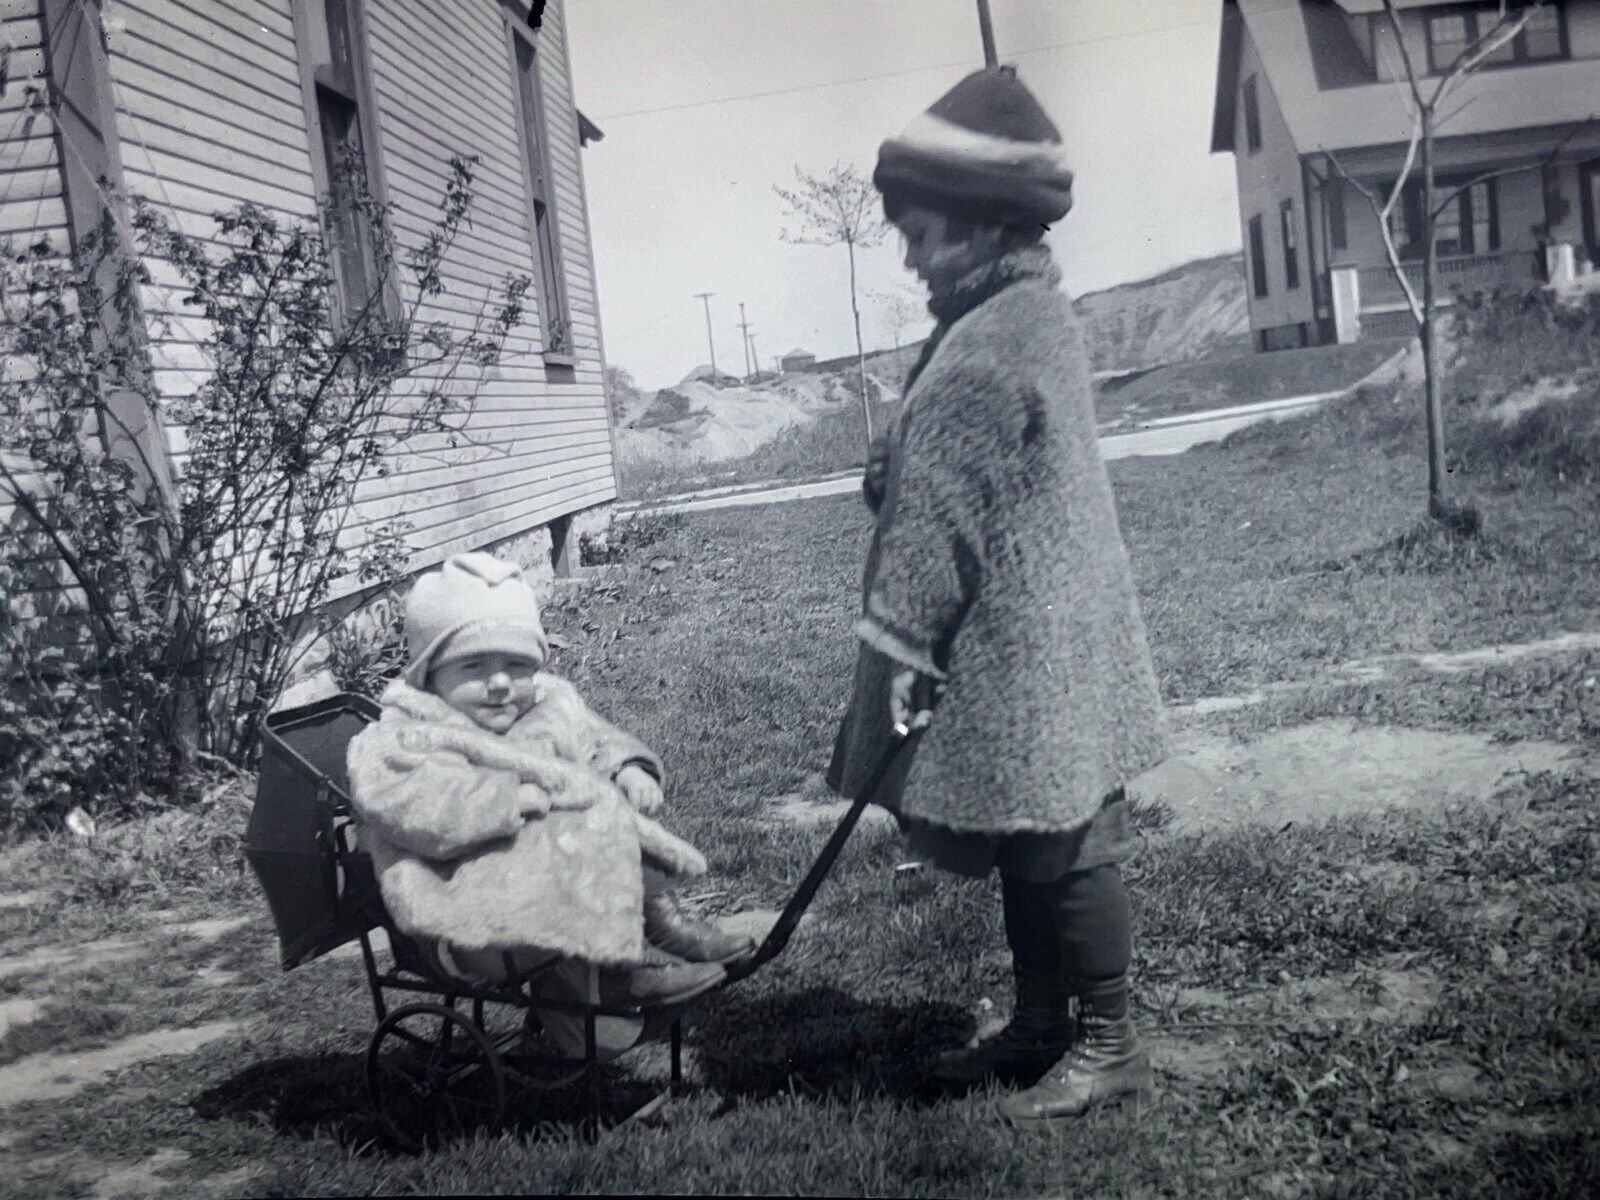 Vintage Photo Negative 1930s Child Pulling Baby In Tiny Wagon Sled Carriage